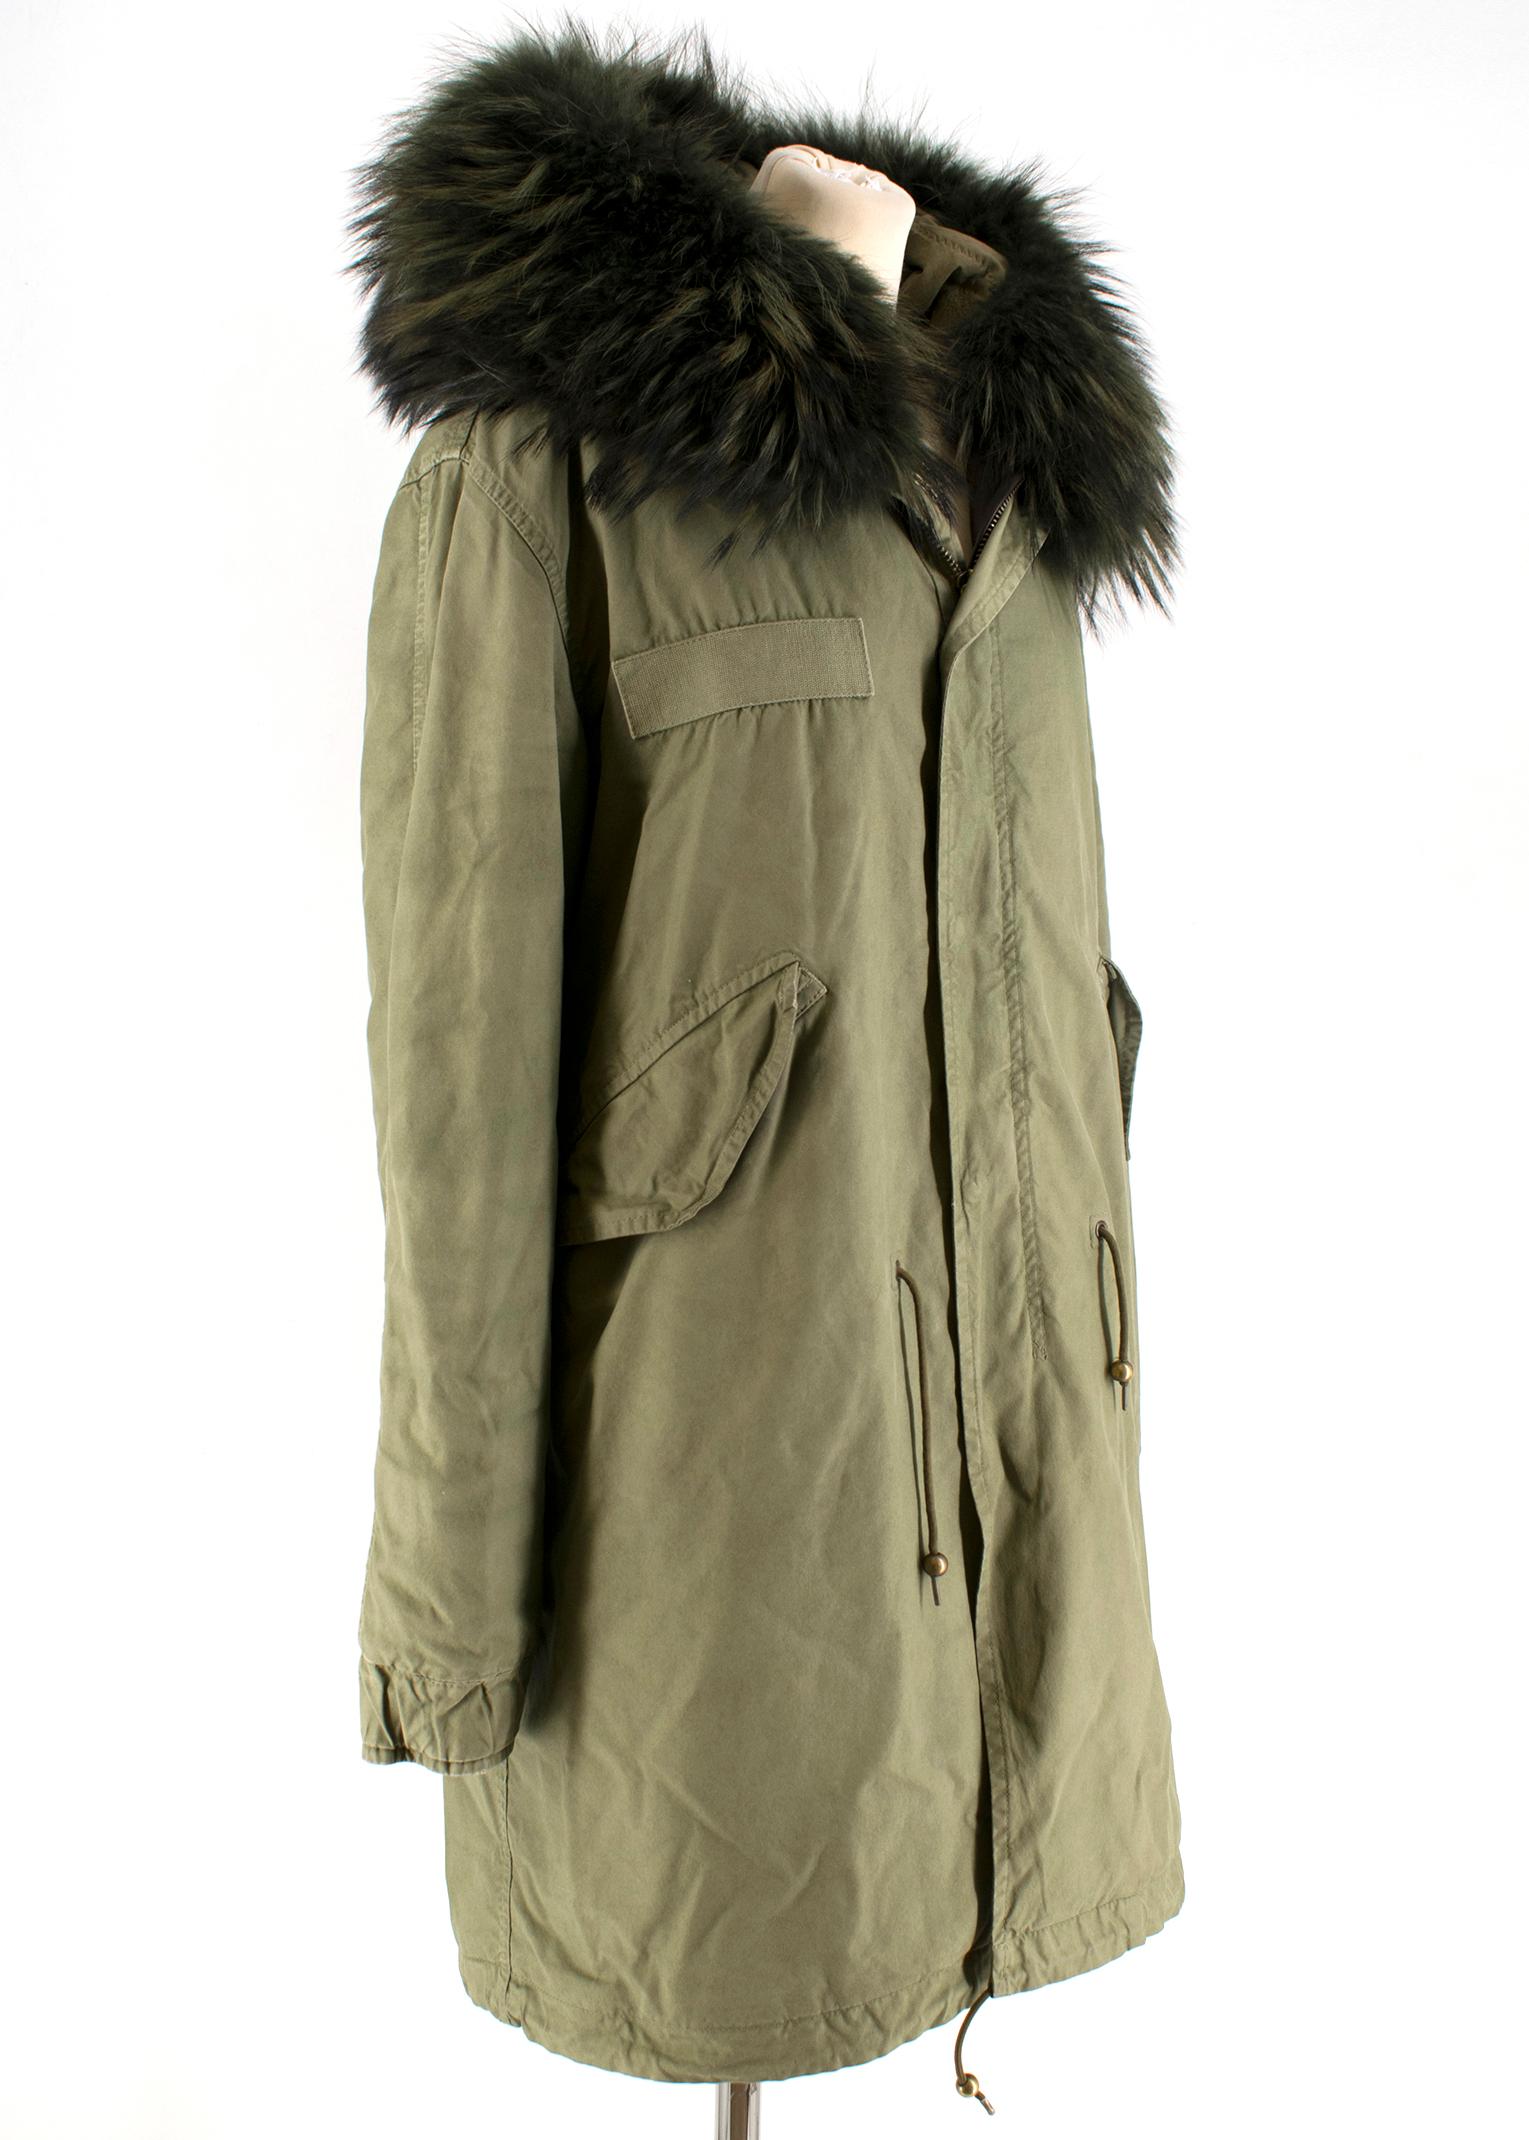 Mr & Mrs Italy Cotton Canvas Long Army Parka 

The cotton canvas Parka 
Quilted lining 
Fur hem 
Long sleeves with button-fastening cuffs 
Flapped front pockets
Drawstring hem
Curved back hem, cent-back hem slits
Concealed zip centre, front